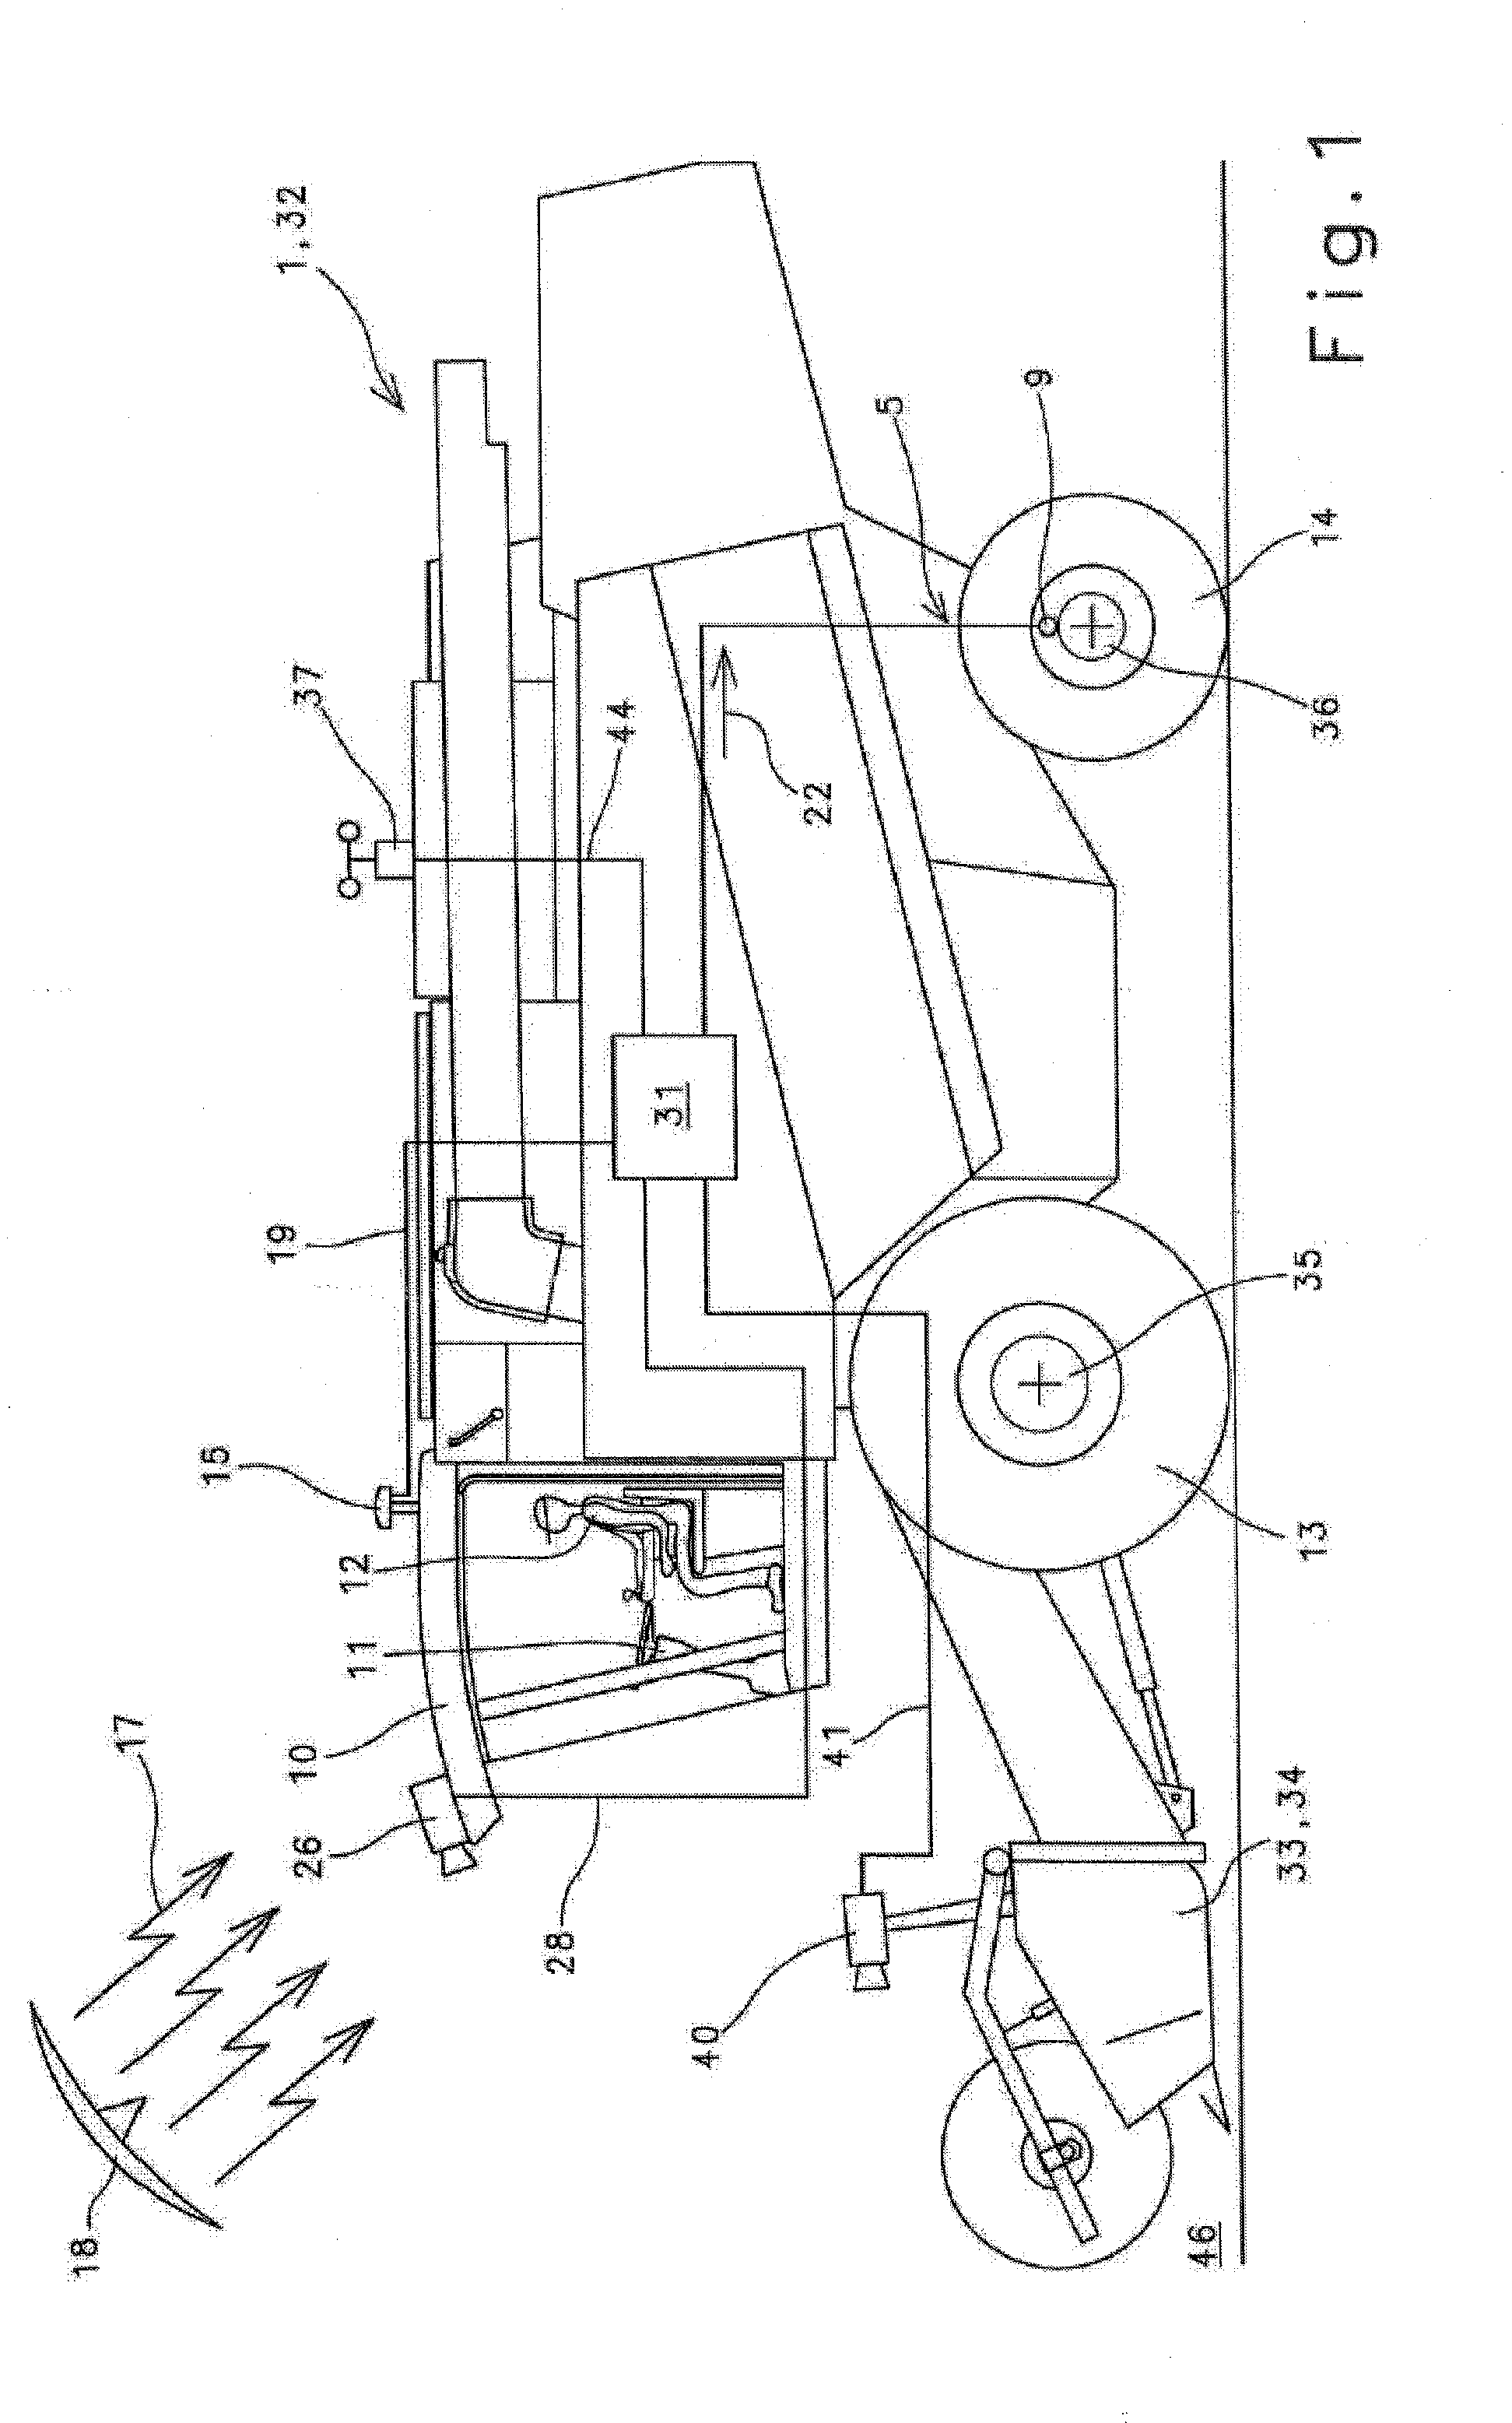 Control system for agricultural working vehicles